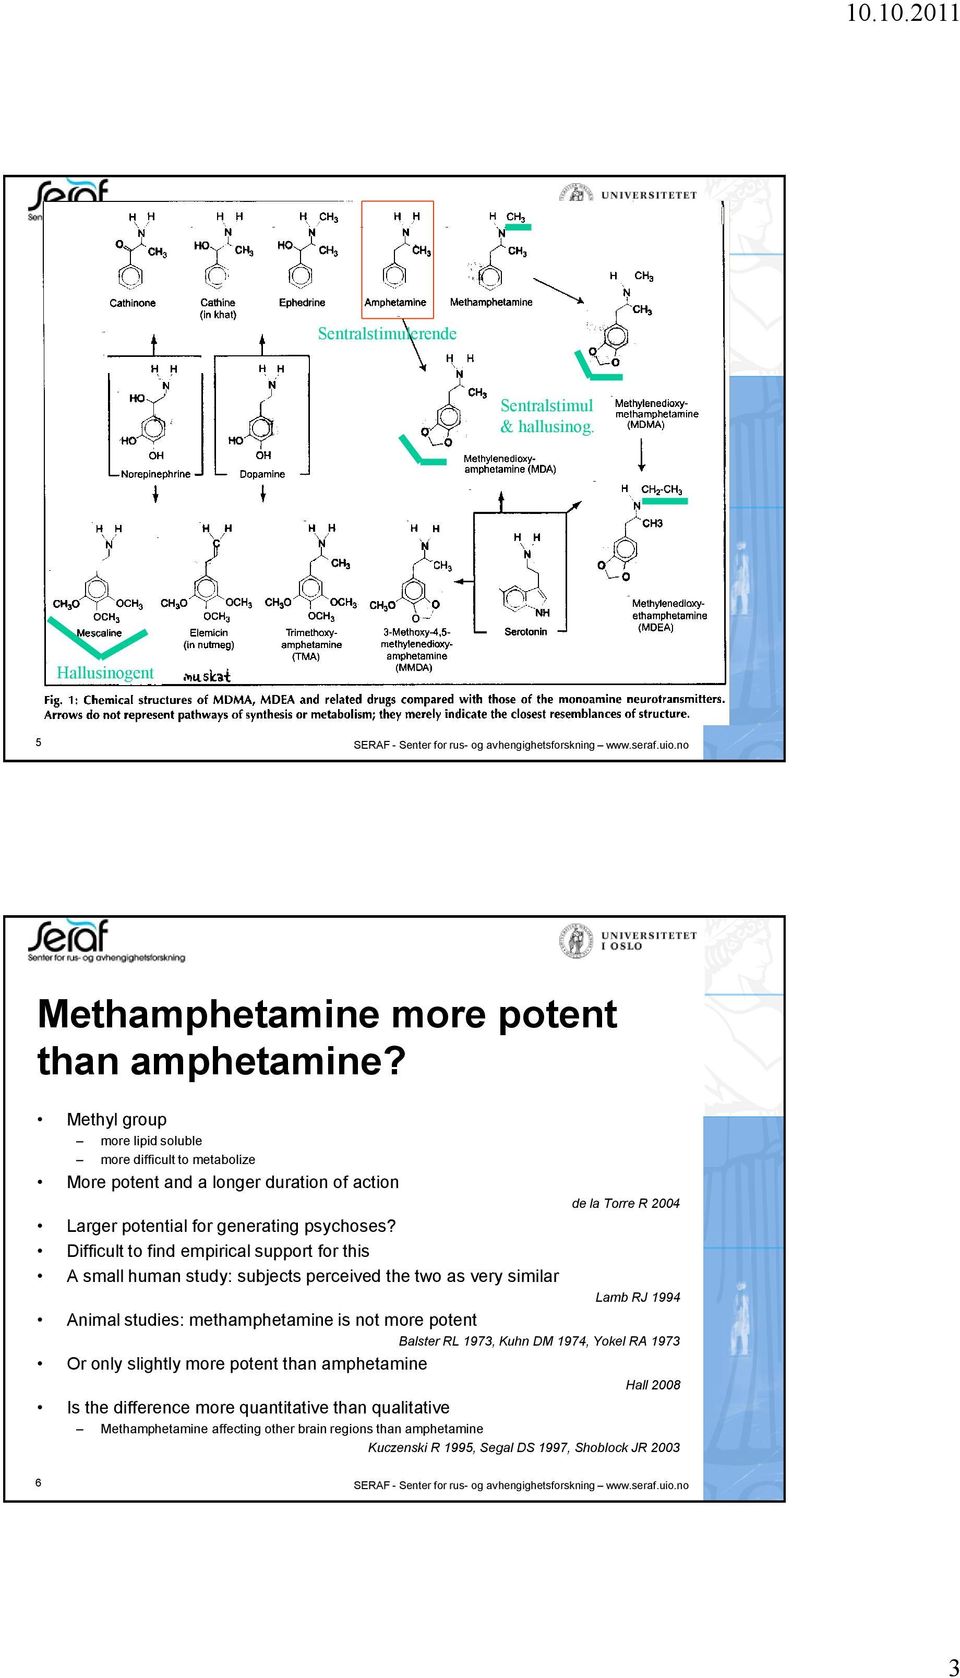 Difficult to find empirical support for this A small human study: subjects perceived the two as very similar de la Torre R 2004 Lamb RJ 1994 Animal studies: methamphetamine is not more potent Balster